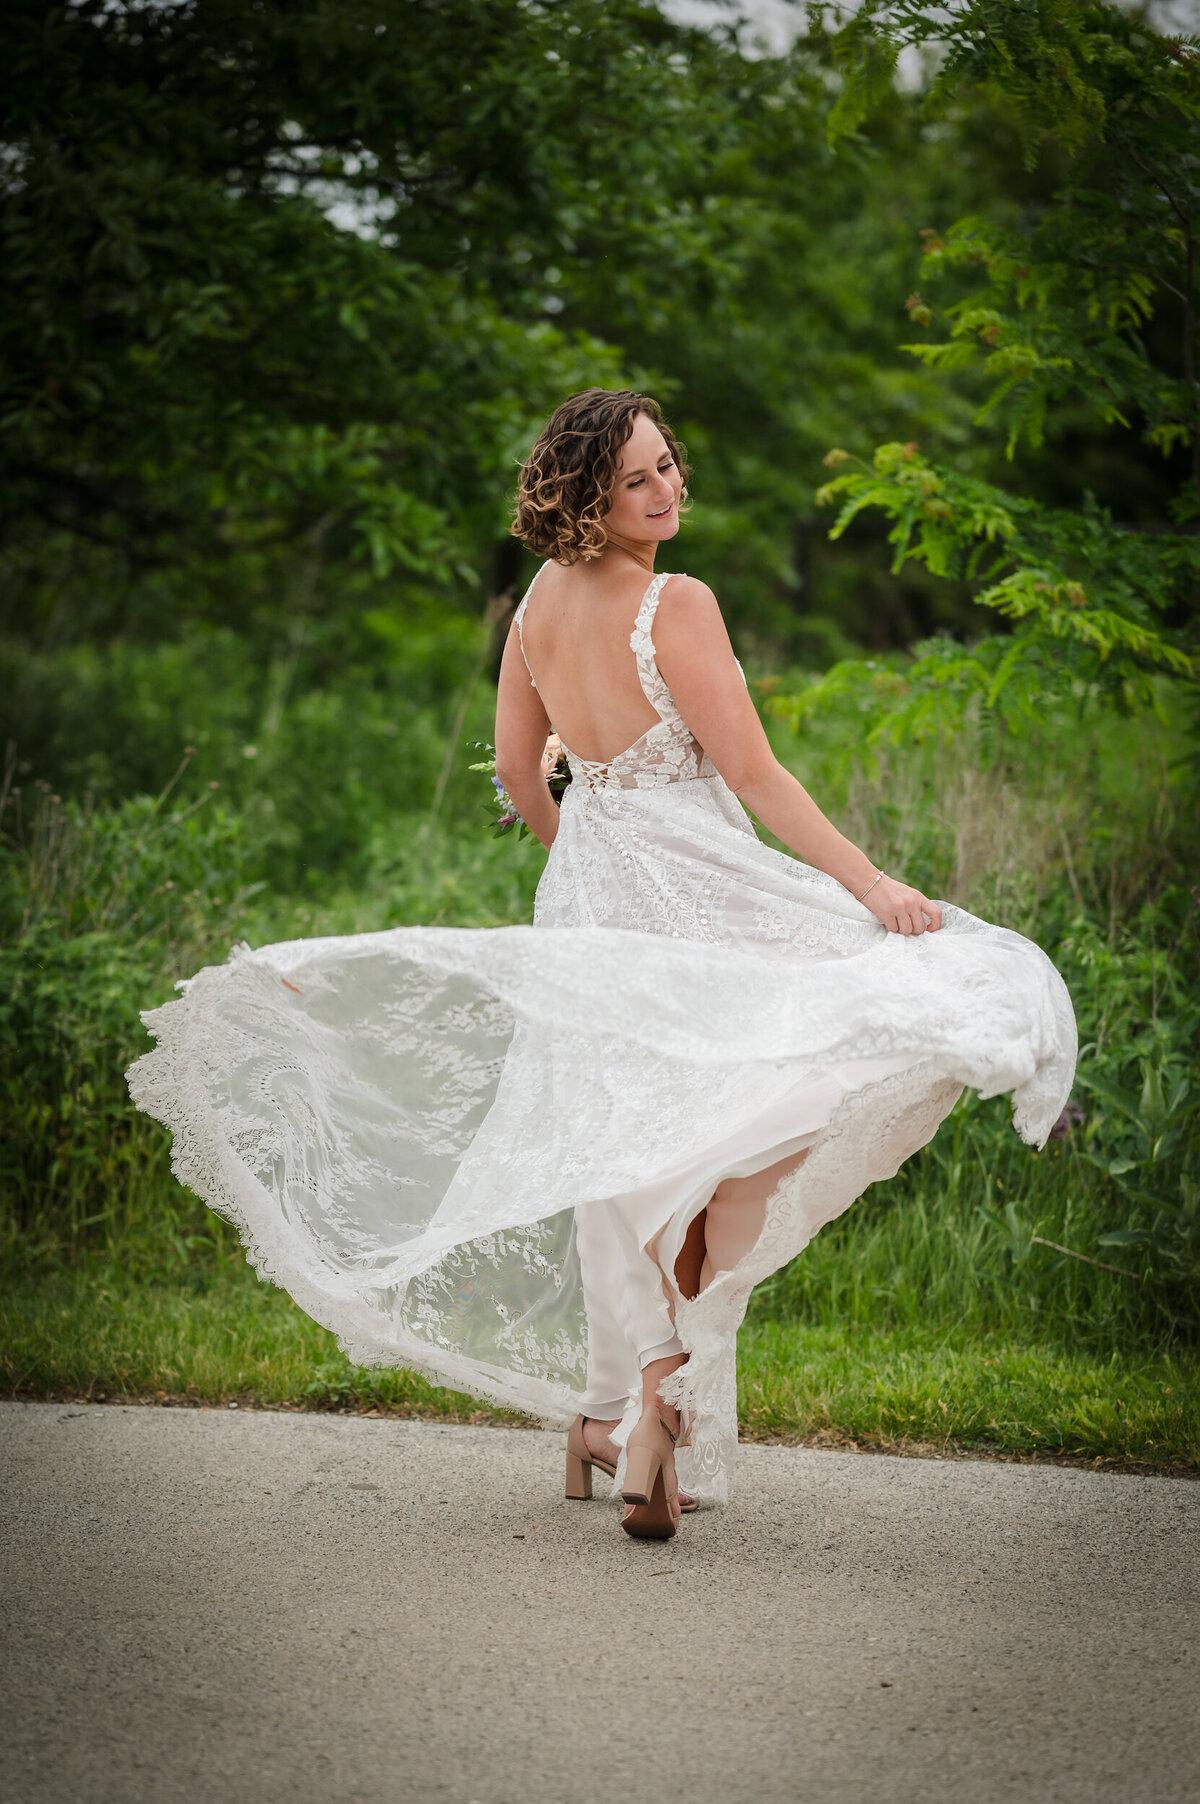 A bride spins around outside